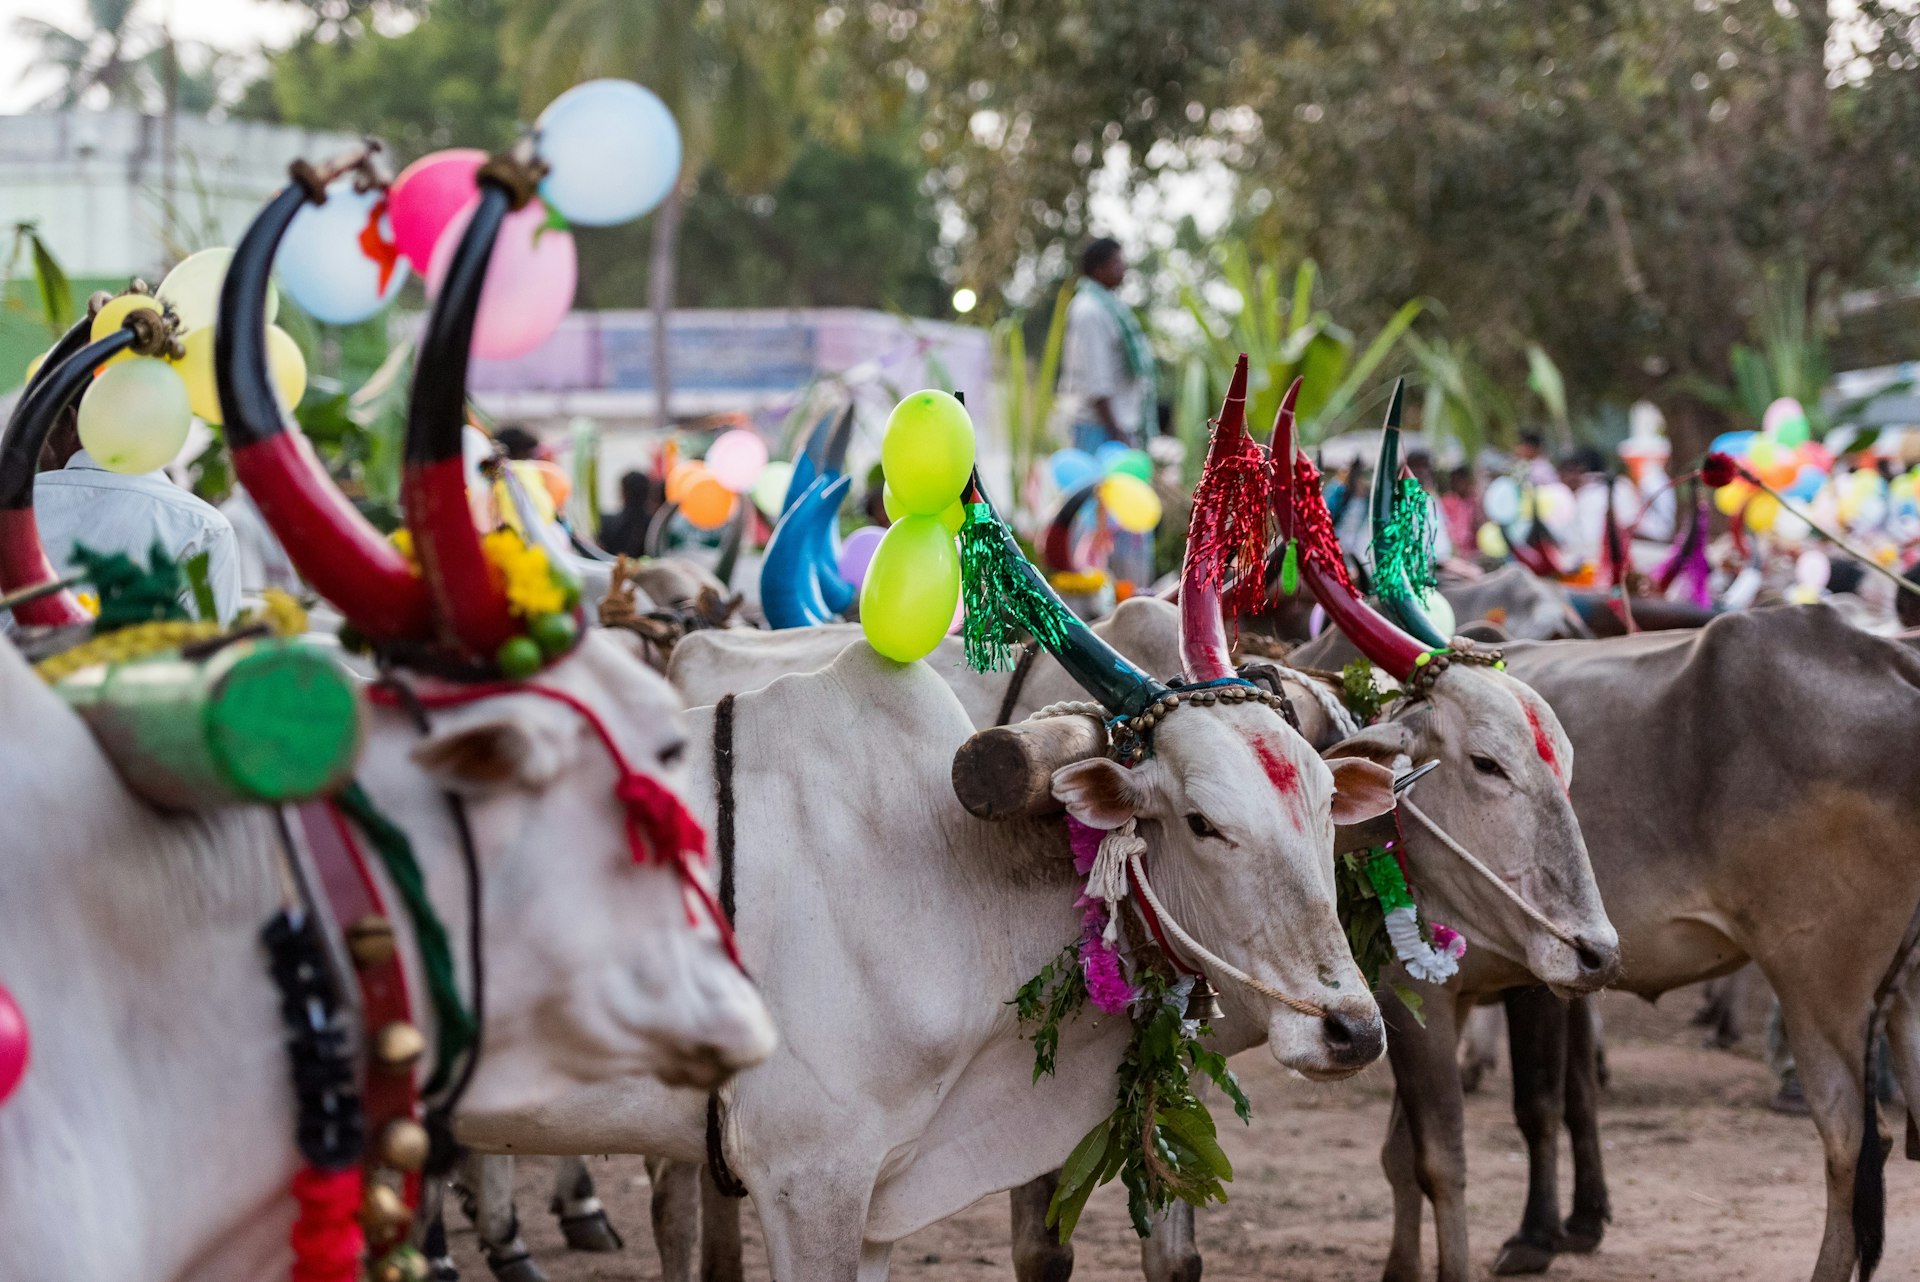 A group of white cows stand in a field, their horns have been painted and colourful ribbons are tied around their necks as part of the Pongal celebrations. 